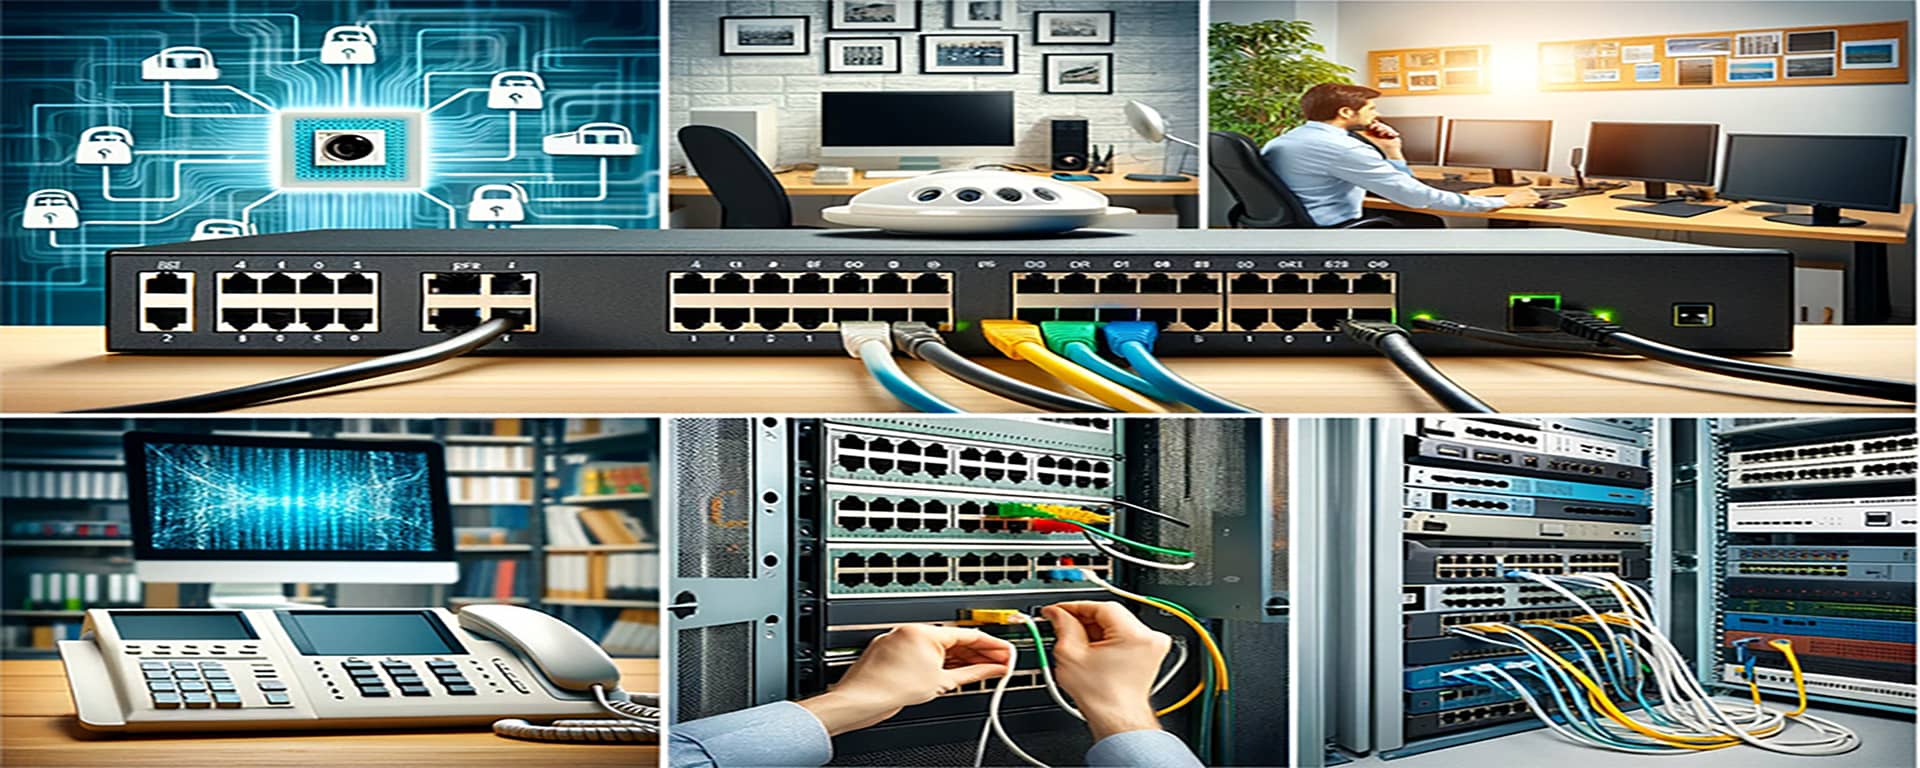 4 Key Benefits of Using PoE Switch in Networking Systems